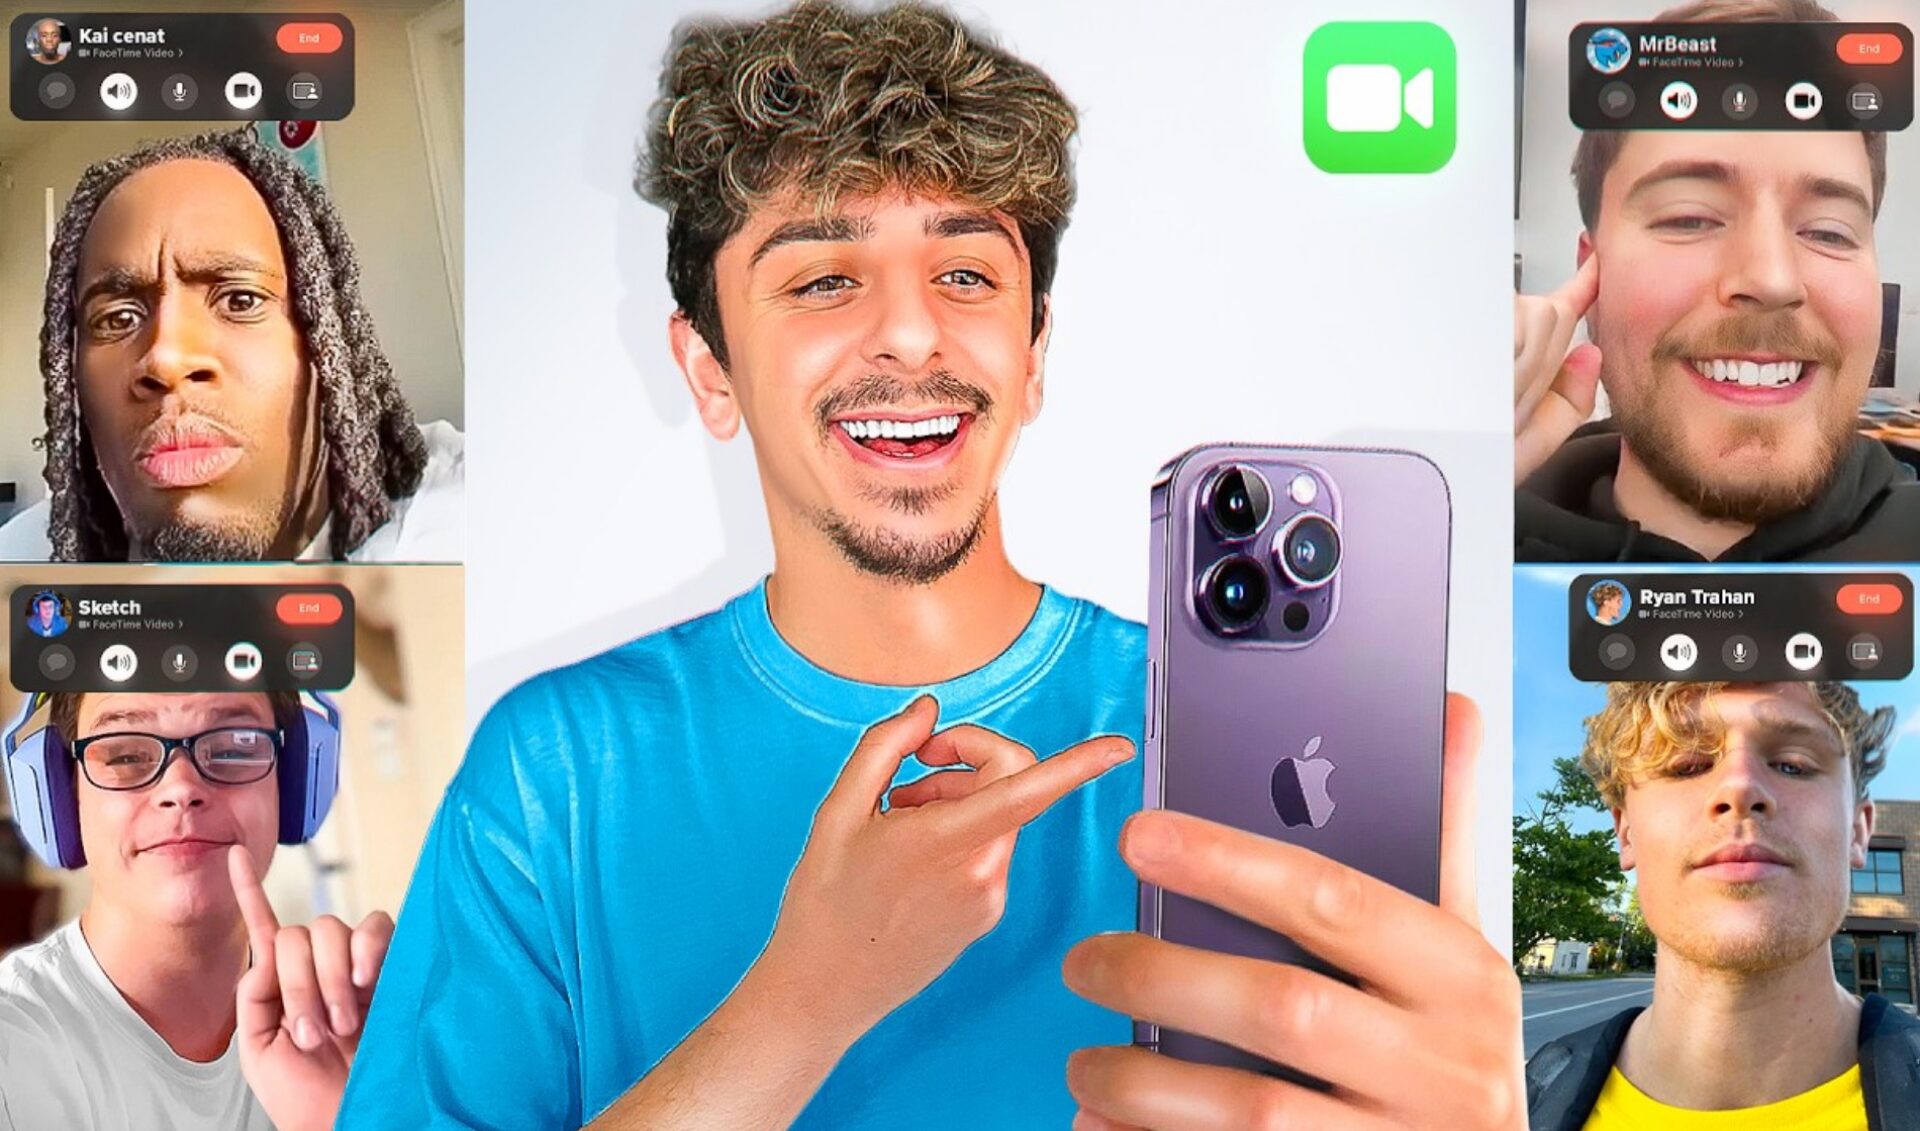 Top 5 Branded Videos of the Week: Incoming FaceTime from FaZe Rug